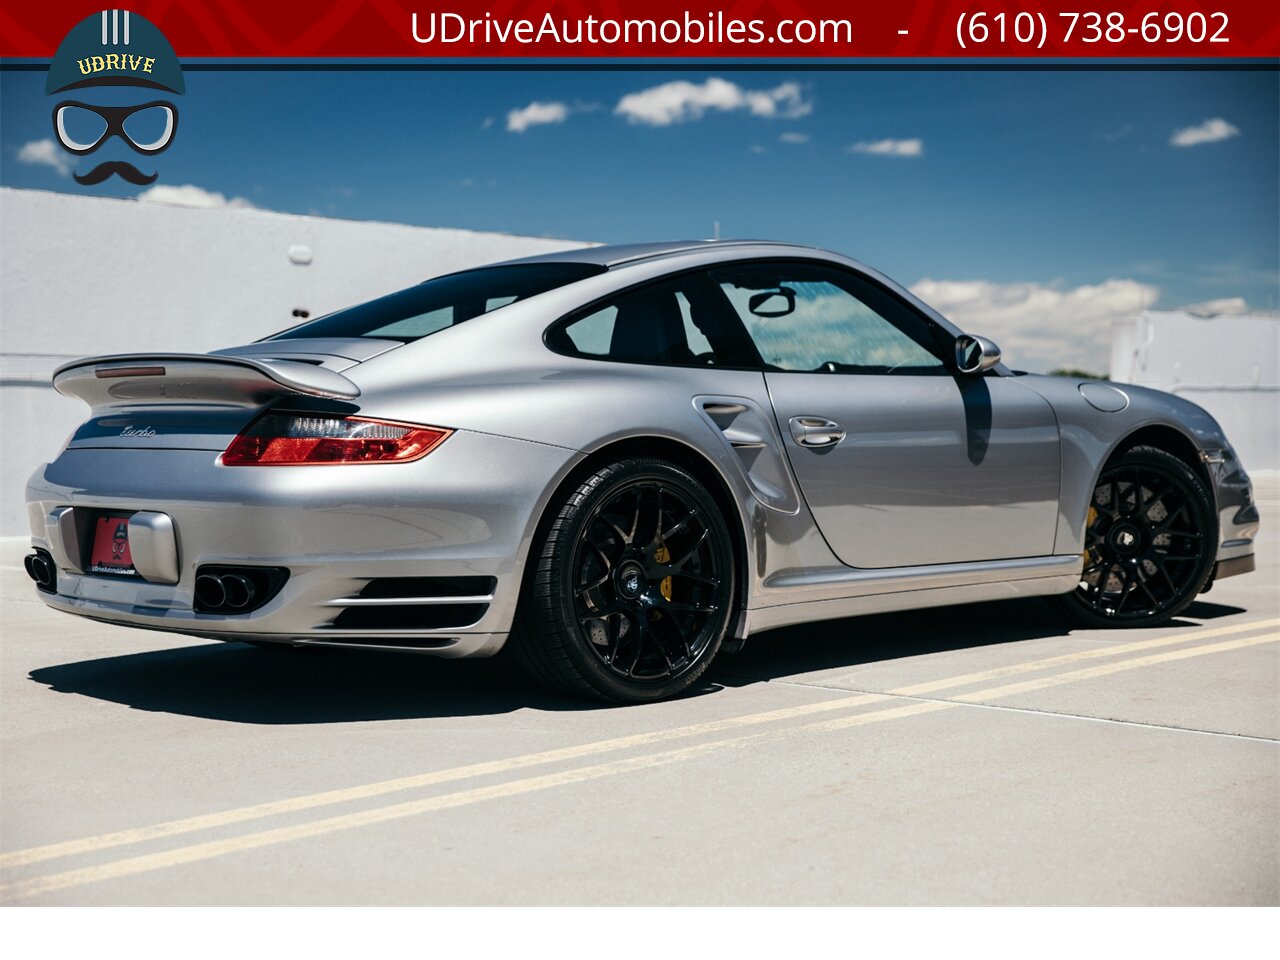 2008 Porsche 911 6 Speed Manual Turbo 997 PCCB's $149k MSRP   - Photo 3 - West Chester, PA 19382